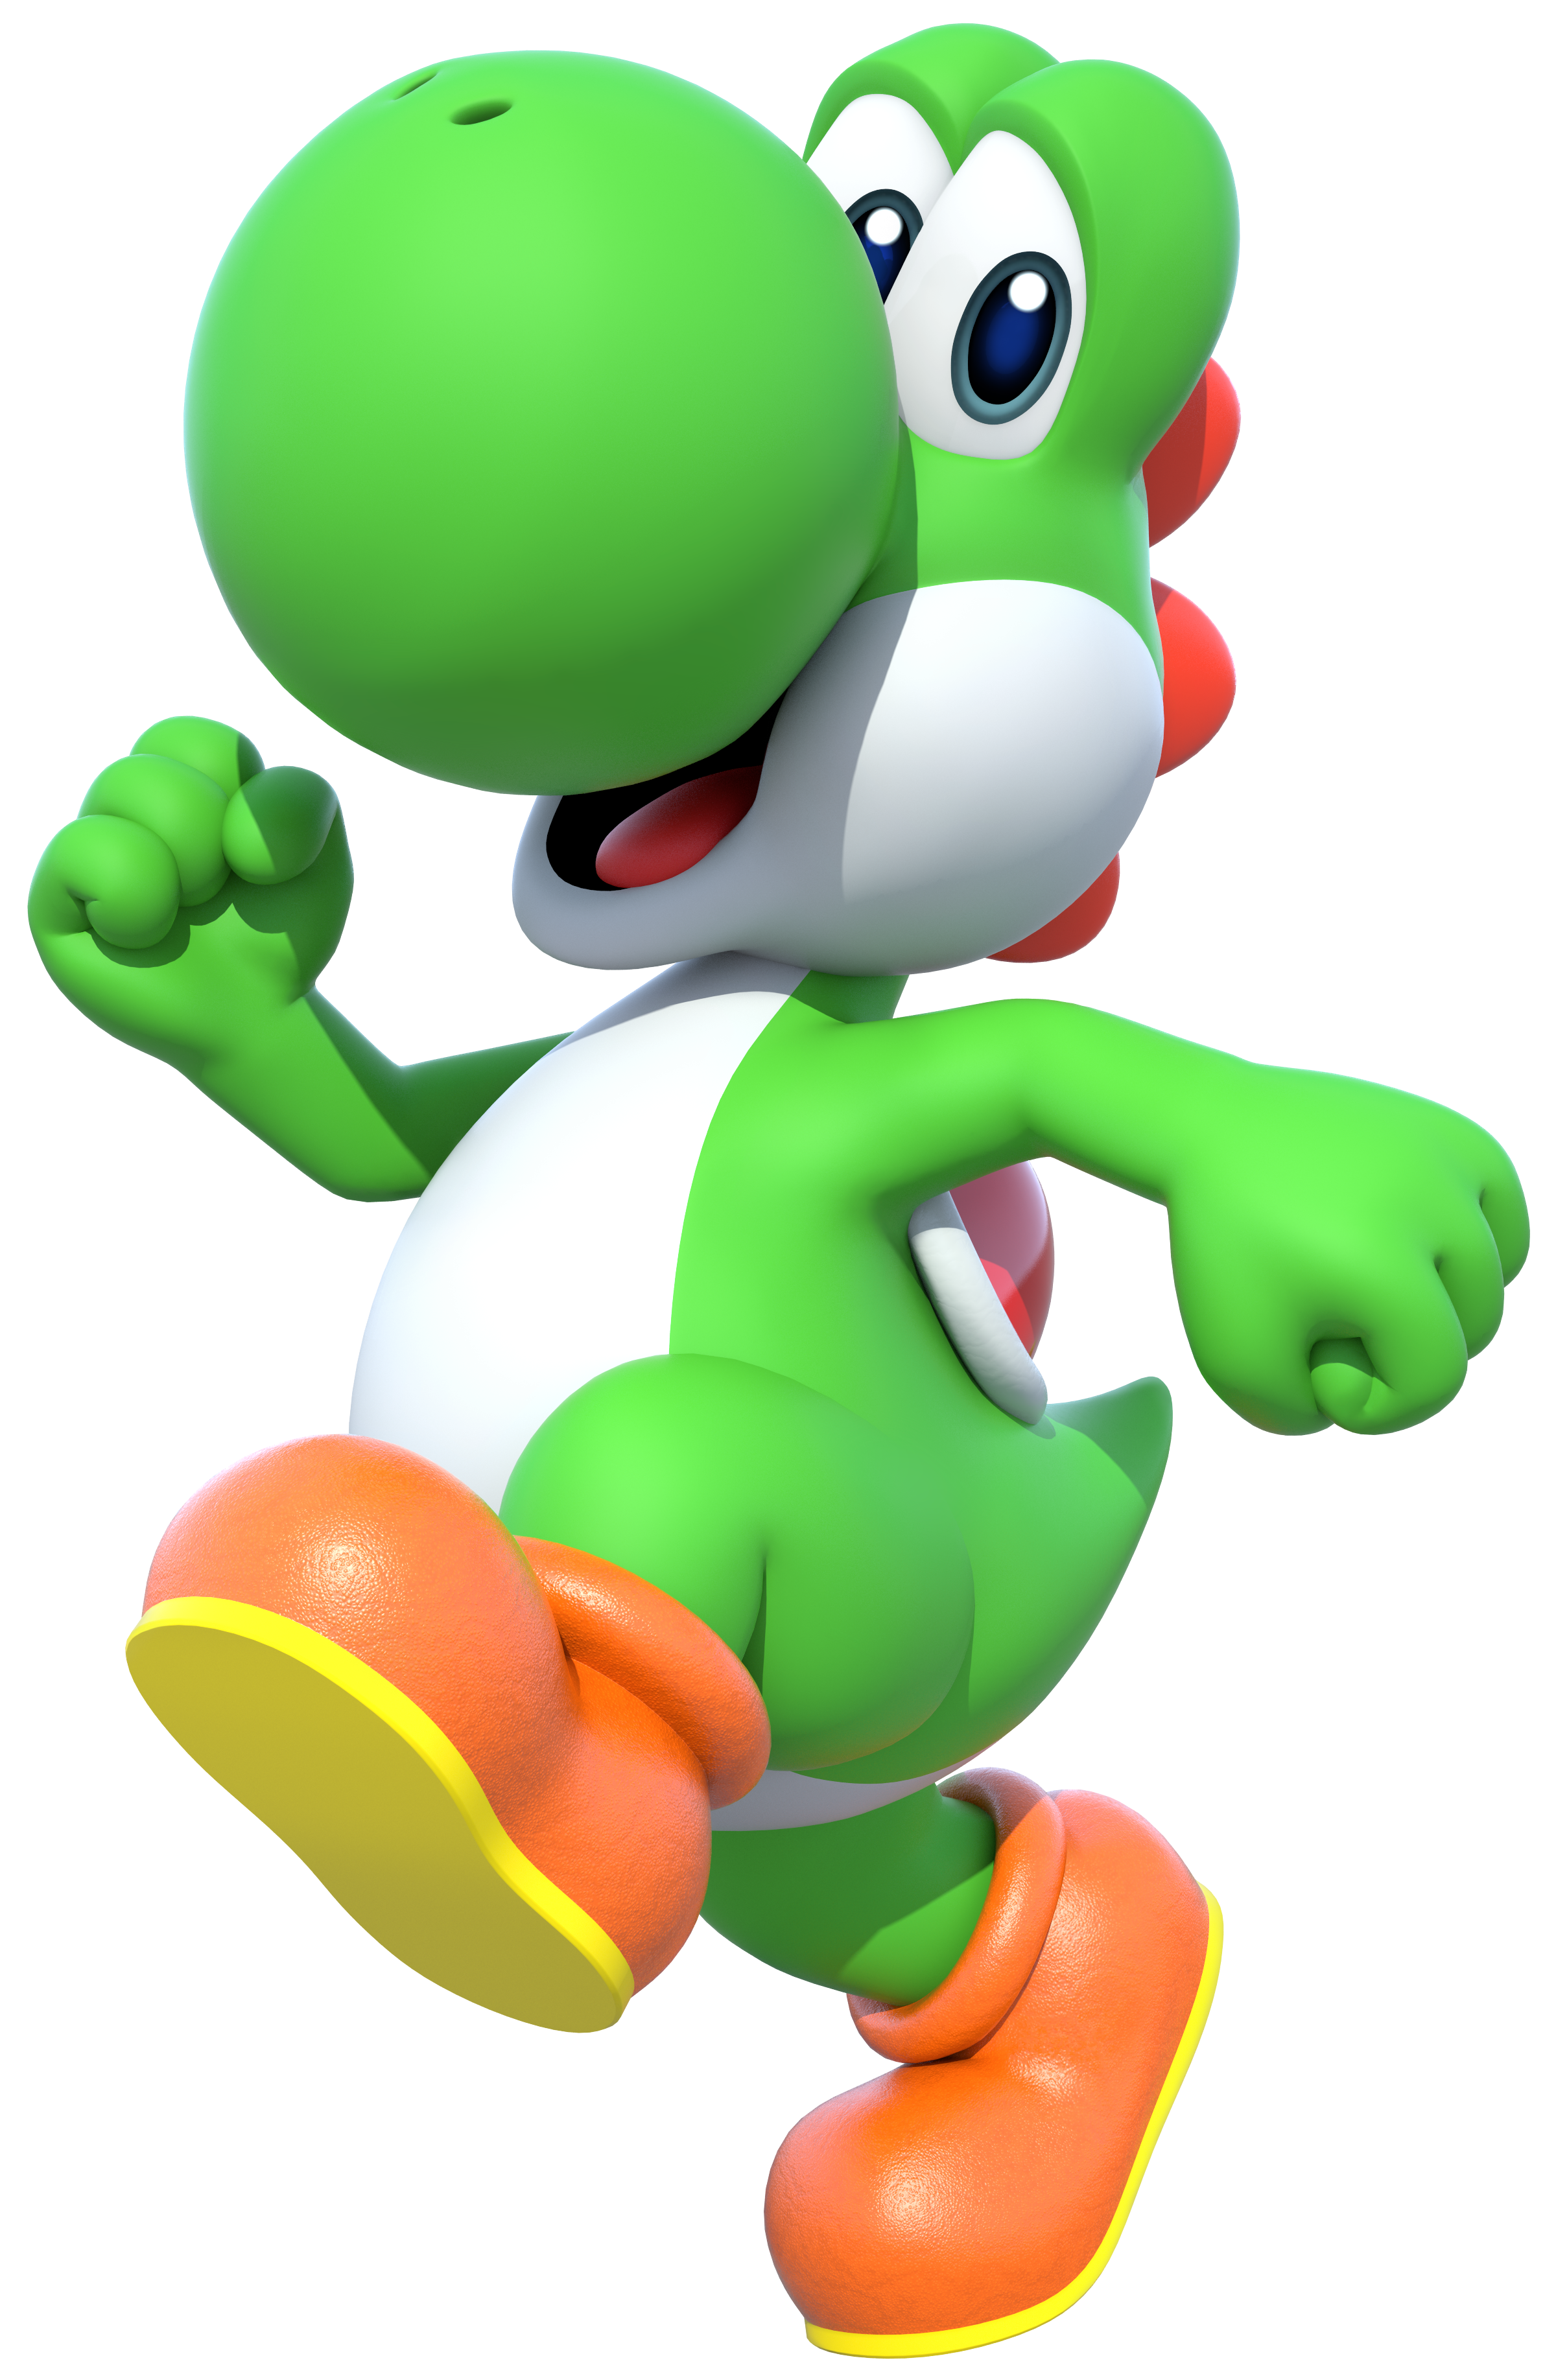 Artwork of Yoshi in Mario Party 10 (also used in Super Mario Party and Mario Kart Tour)